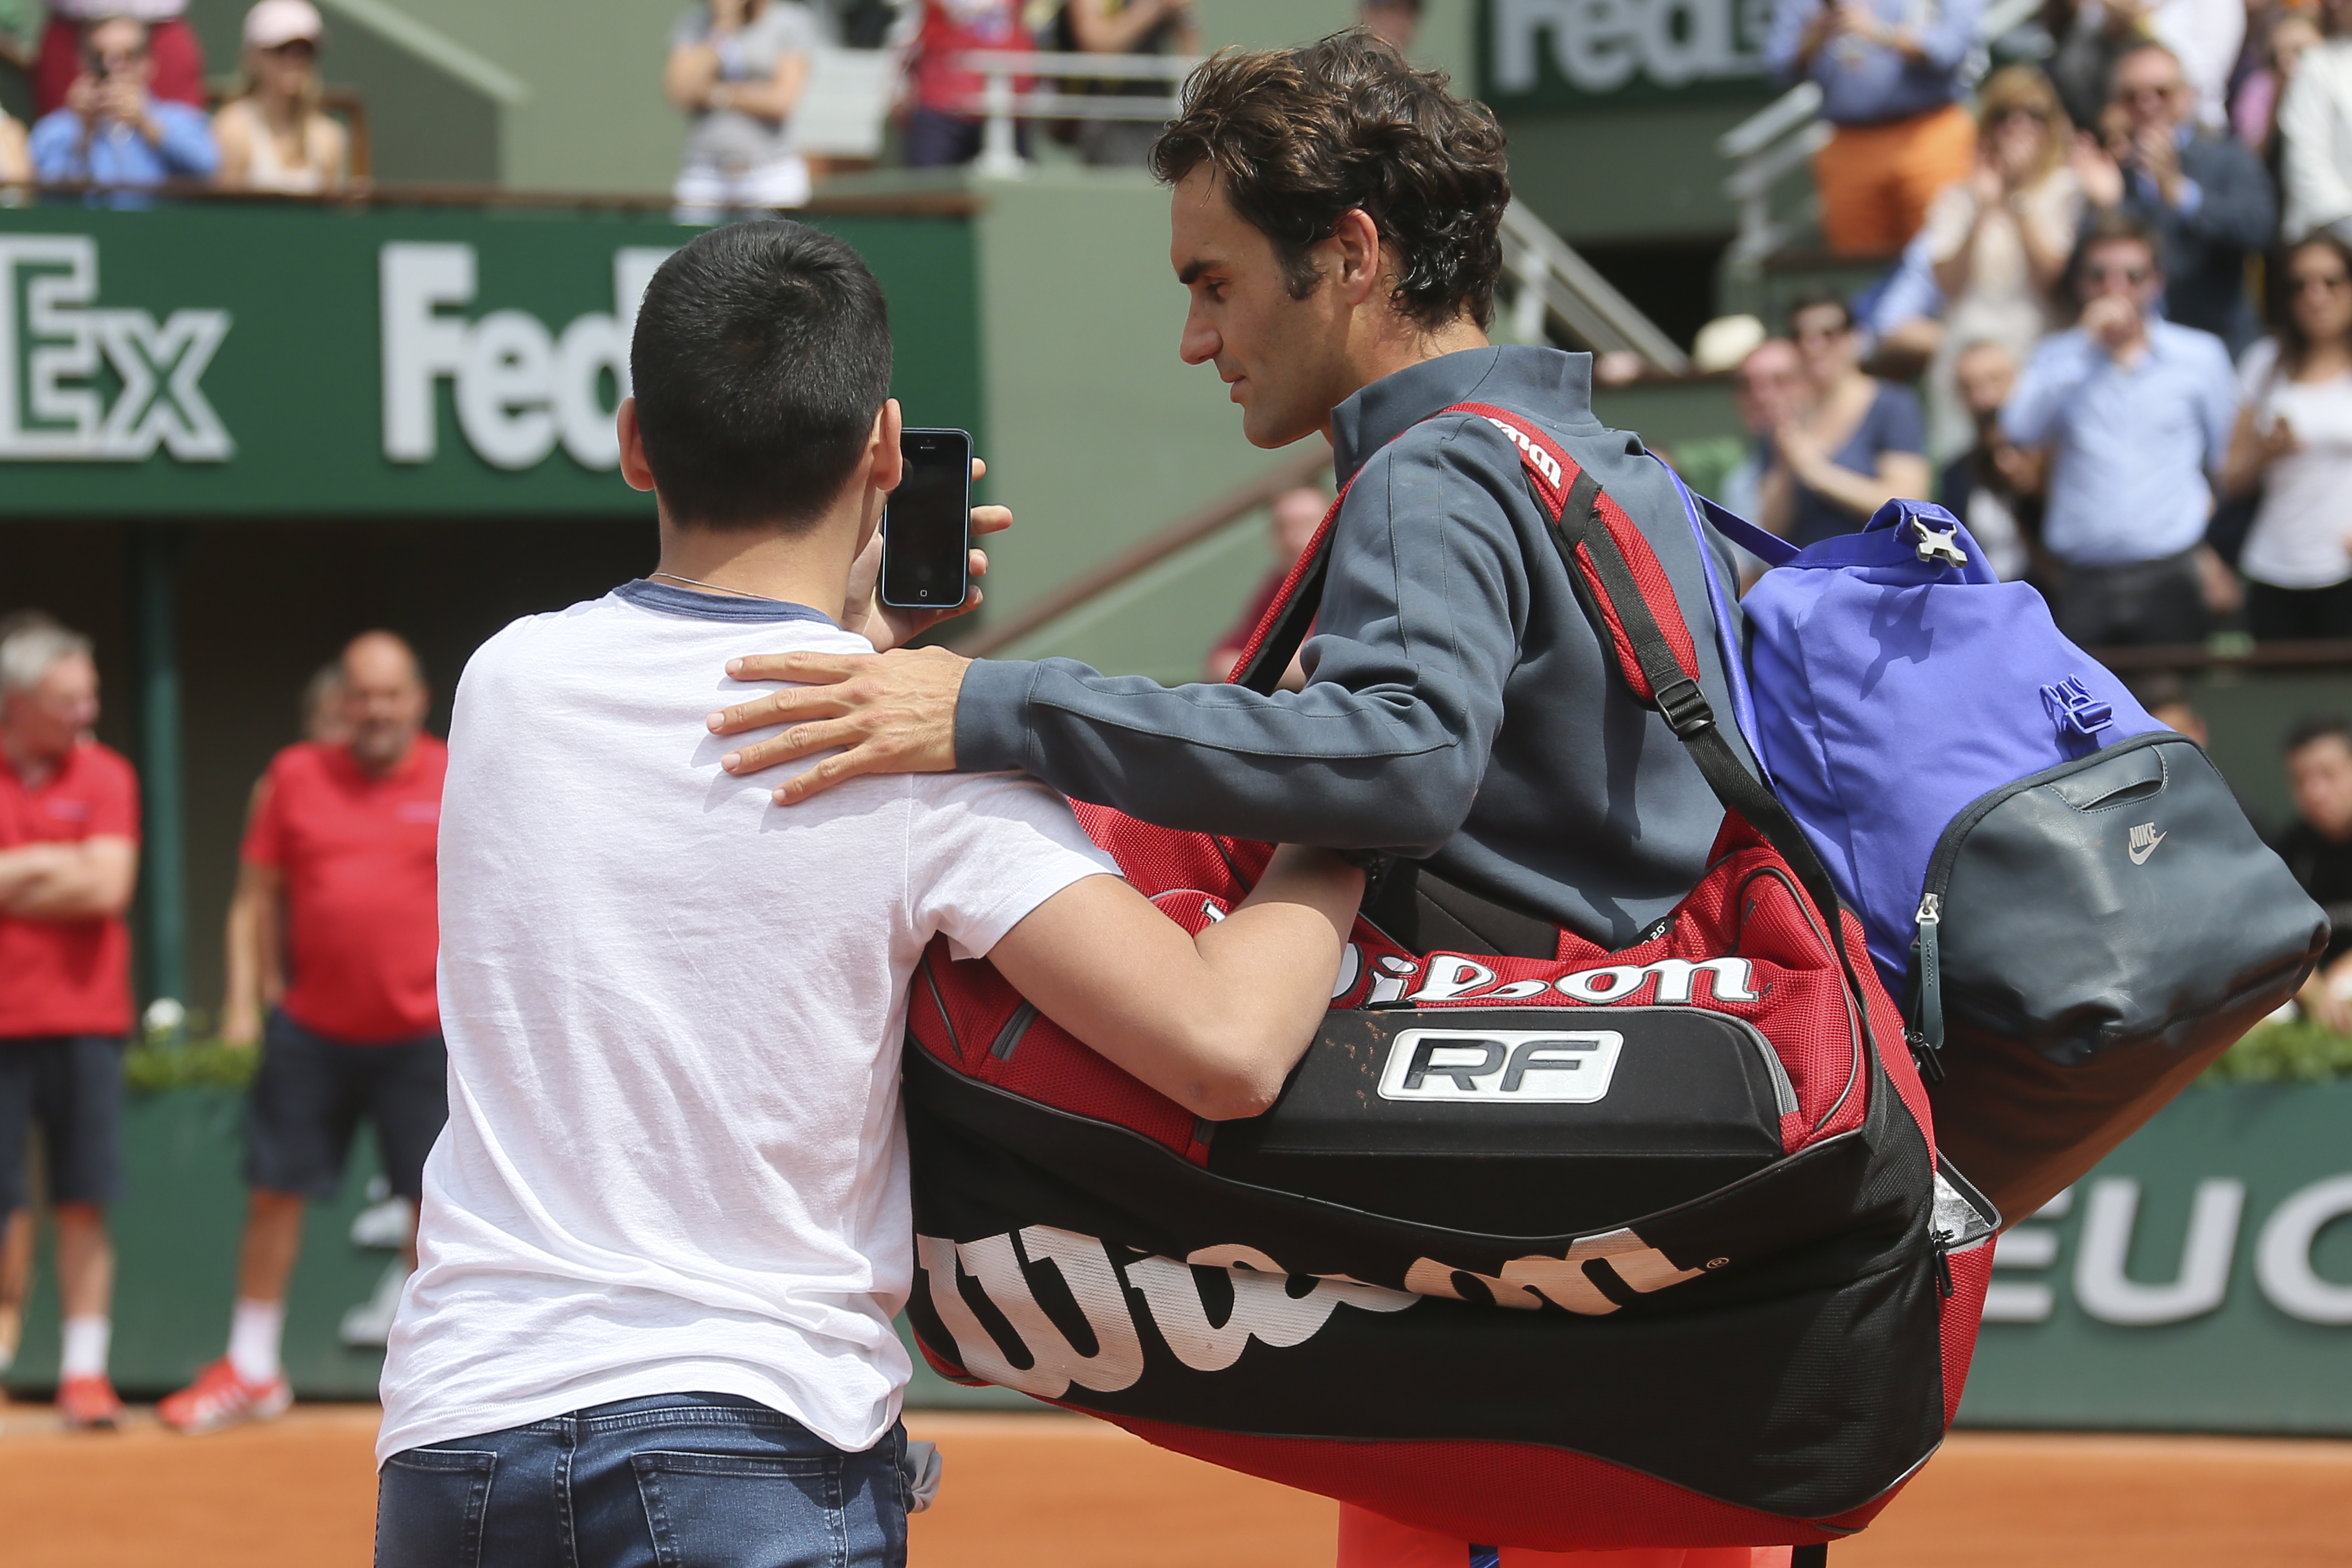 A boy tries to take a selfie with Roger Federer on centre court at the French Open. Federer had just won his first-round match against Colombia's Alejandro Falla when the teenager confronted him. Photo: AP